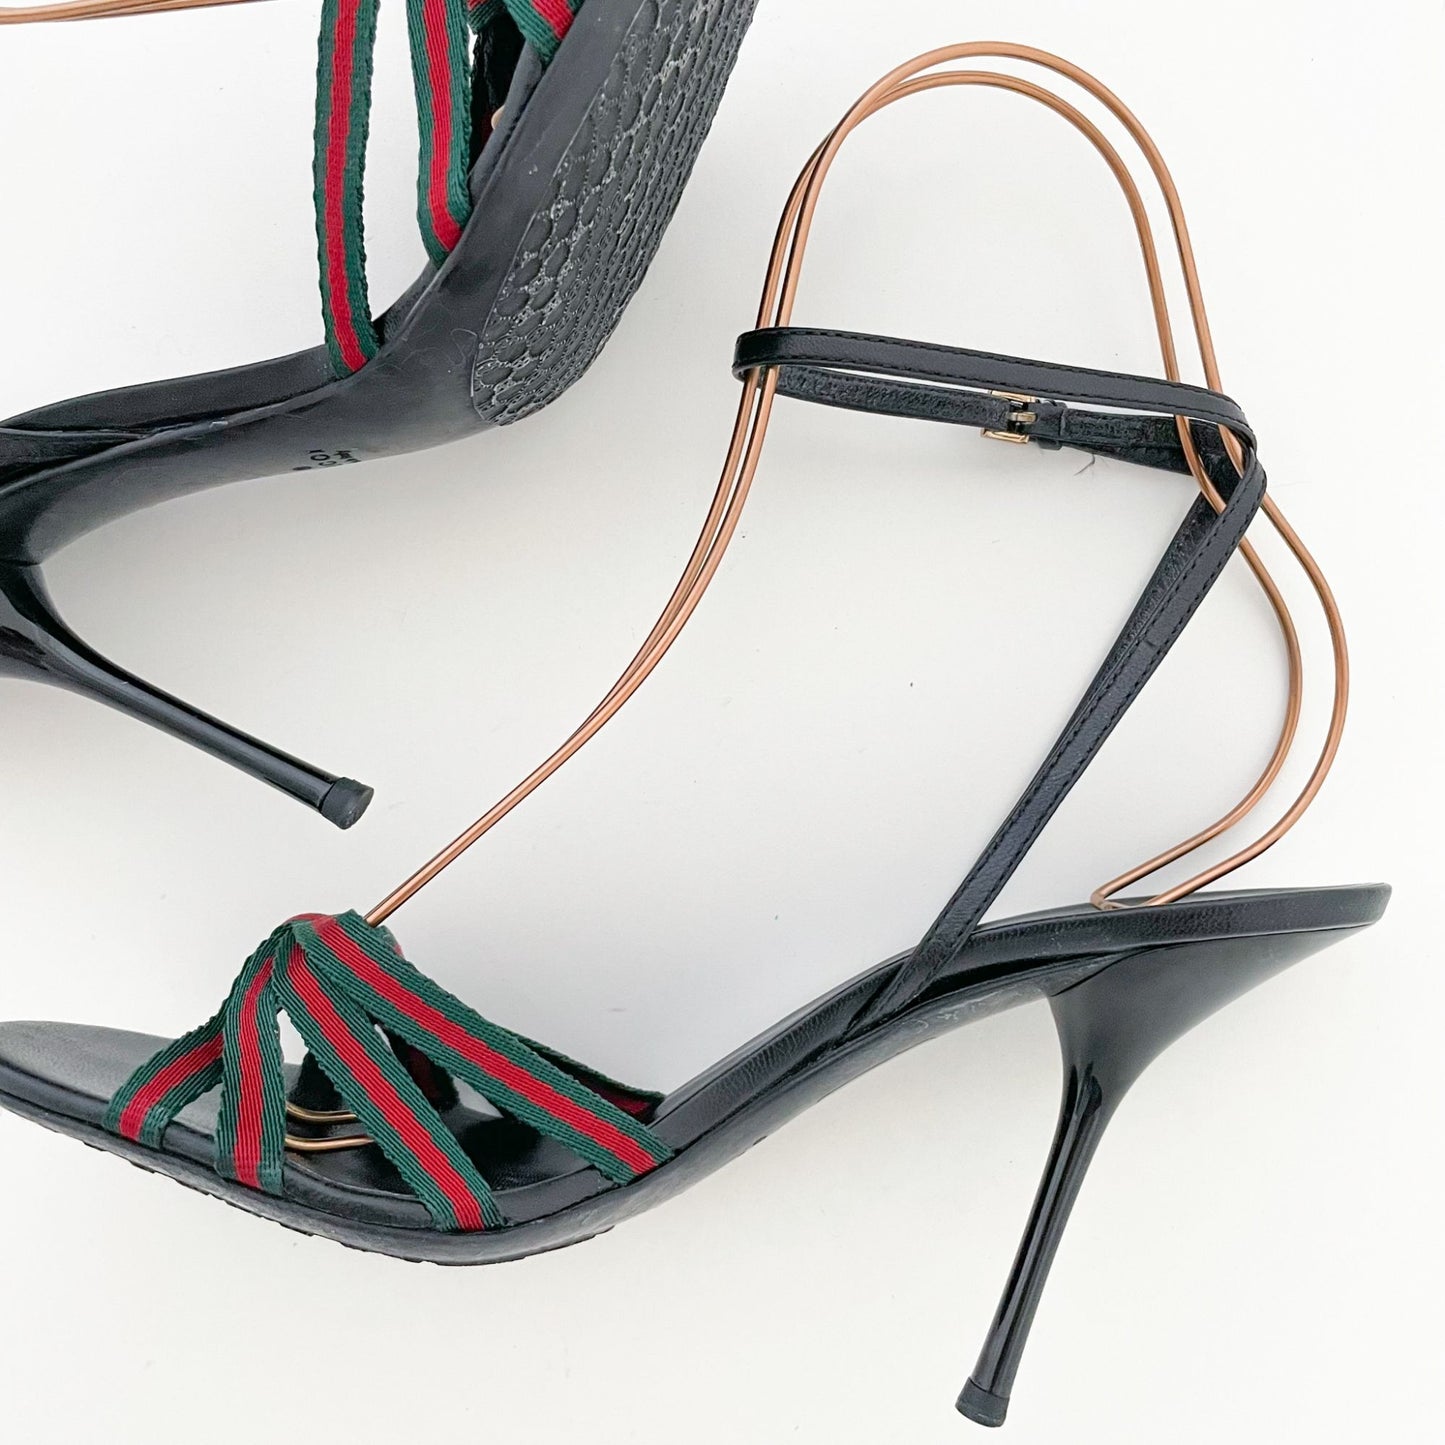 Gucci Mirabelle Knotted Web Stripe Sandals in Black/Green/Red Size 9.5